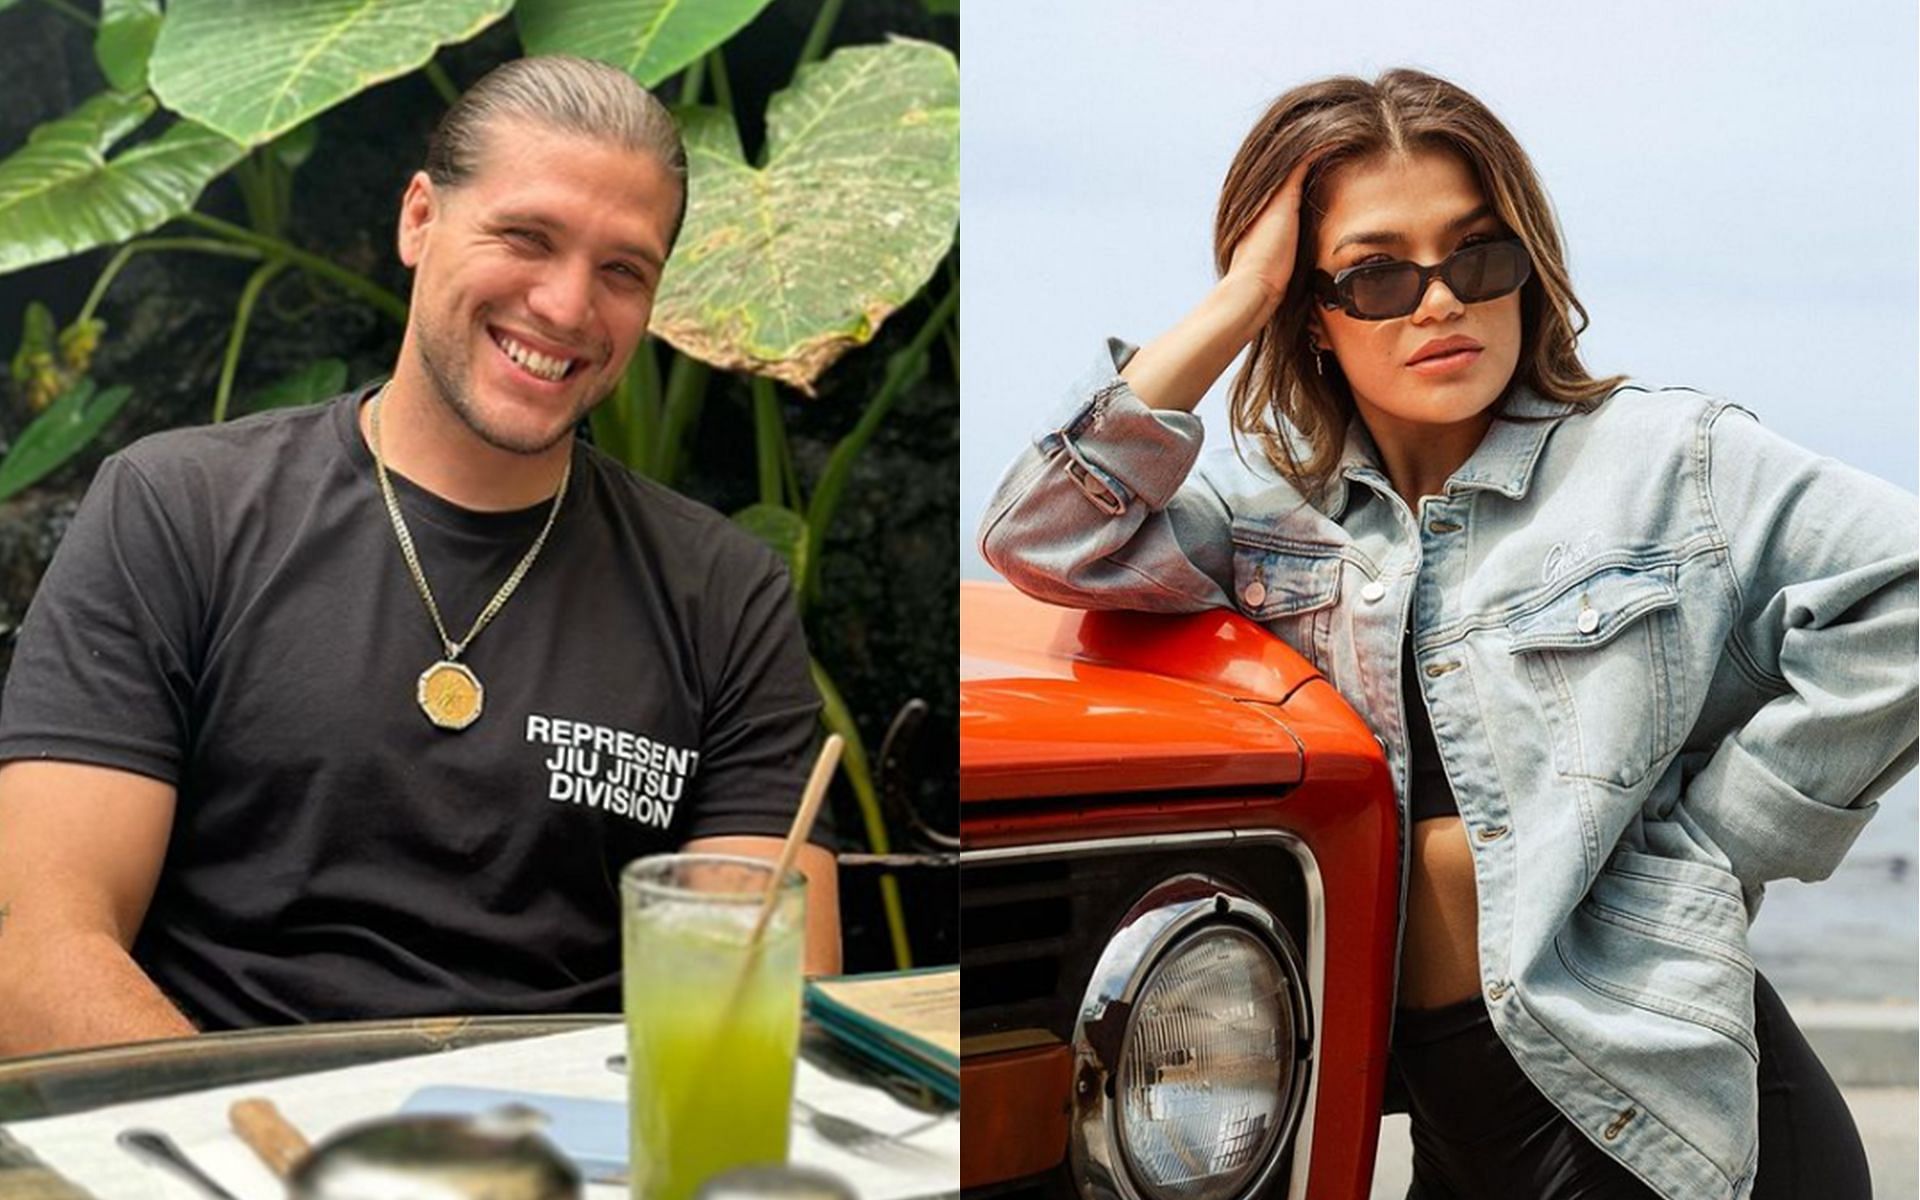 Brian Ortega (left) was in a romantic relationship with Tracy Cortez (right) [Images Courtesy: @briantcity and @cortezmma Instagram]